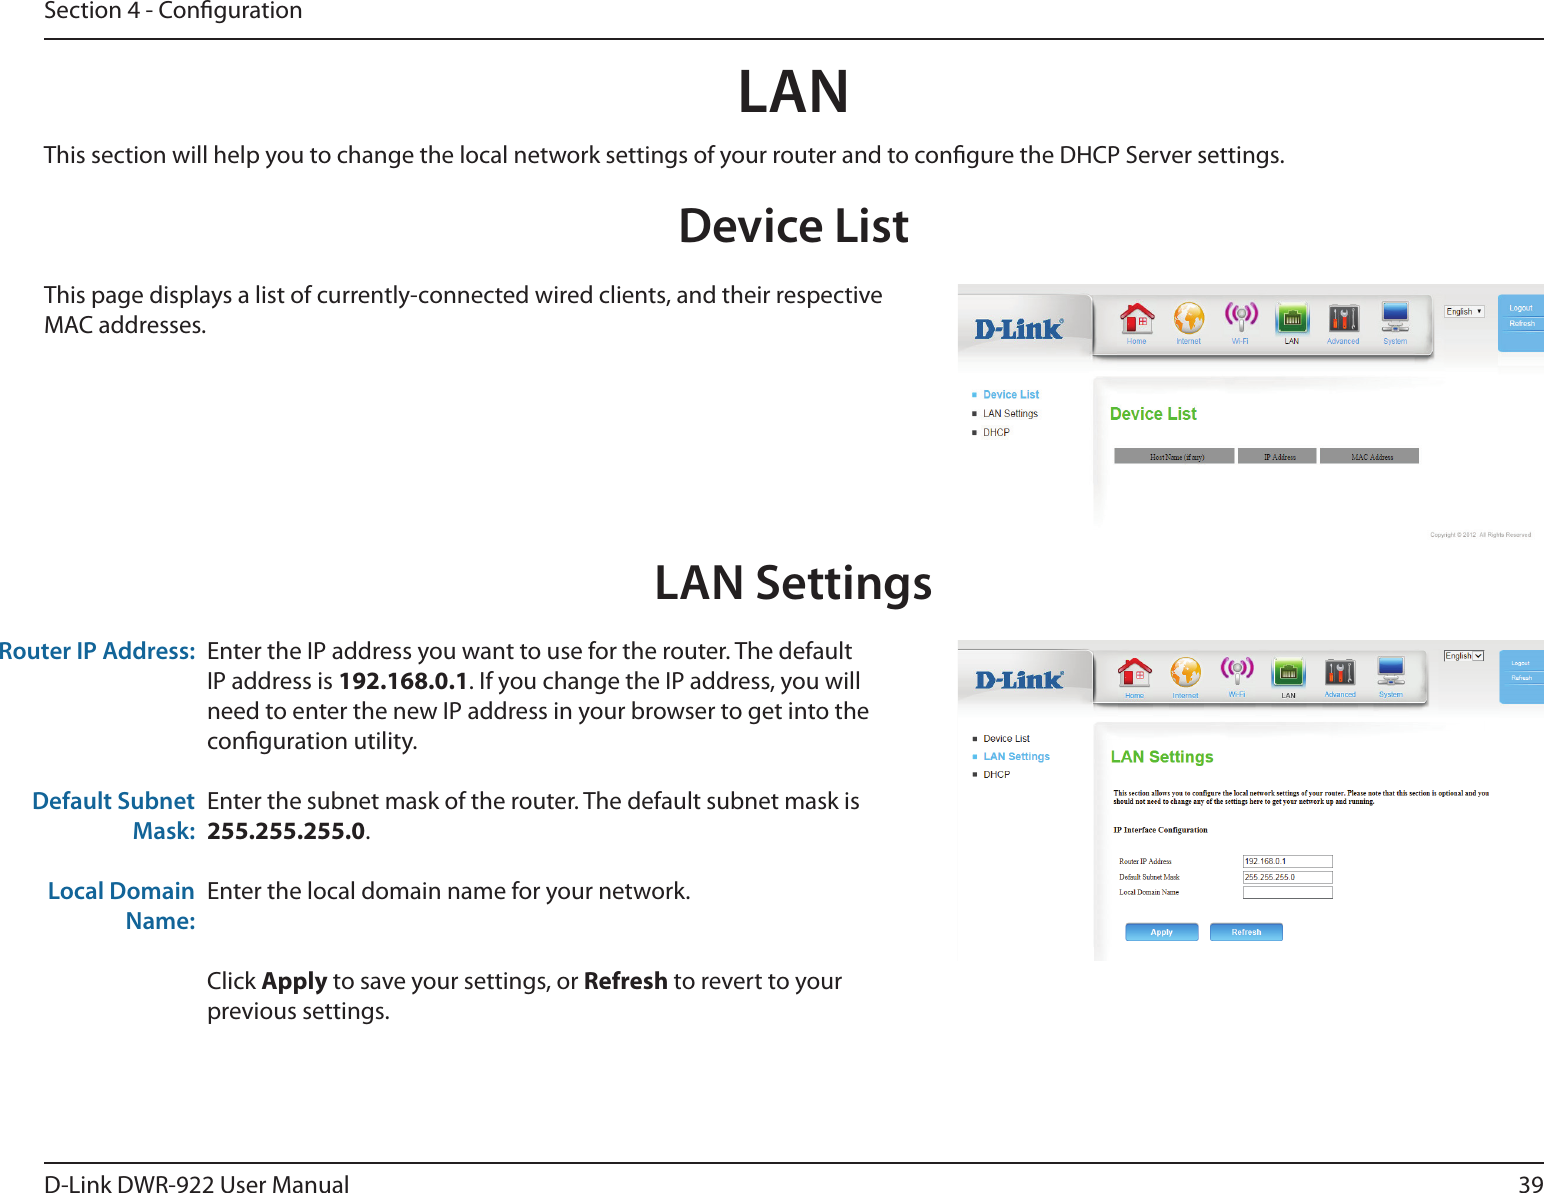 39D-Link DWR-922 User ManualSection 4 - CongurationLANDevice ListThis page displays a list of currently-connected wired clients, and their respective MAC addresses.LAN SettingsEnter the IP address you want to use for the router. The default IP address is 192.168.0.1. If you change the IP address, you will need to enter the new IP address in your browser to get into the conguration utility.Enter the subnet mask of the router. The default subnet mask is 255.255.255.0.Enter the local domain name for your network.Click Apply to save your settings, or Refresh to revert to your previous settings.Router IP Address:Default Subnet Mask:Local Domain Name:This section will help you to change the local network settings of your router and to congure the DHCP Server settings.